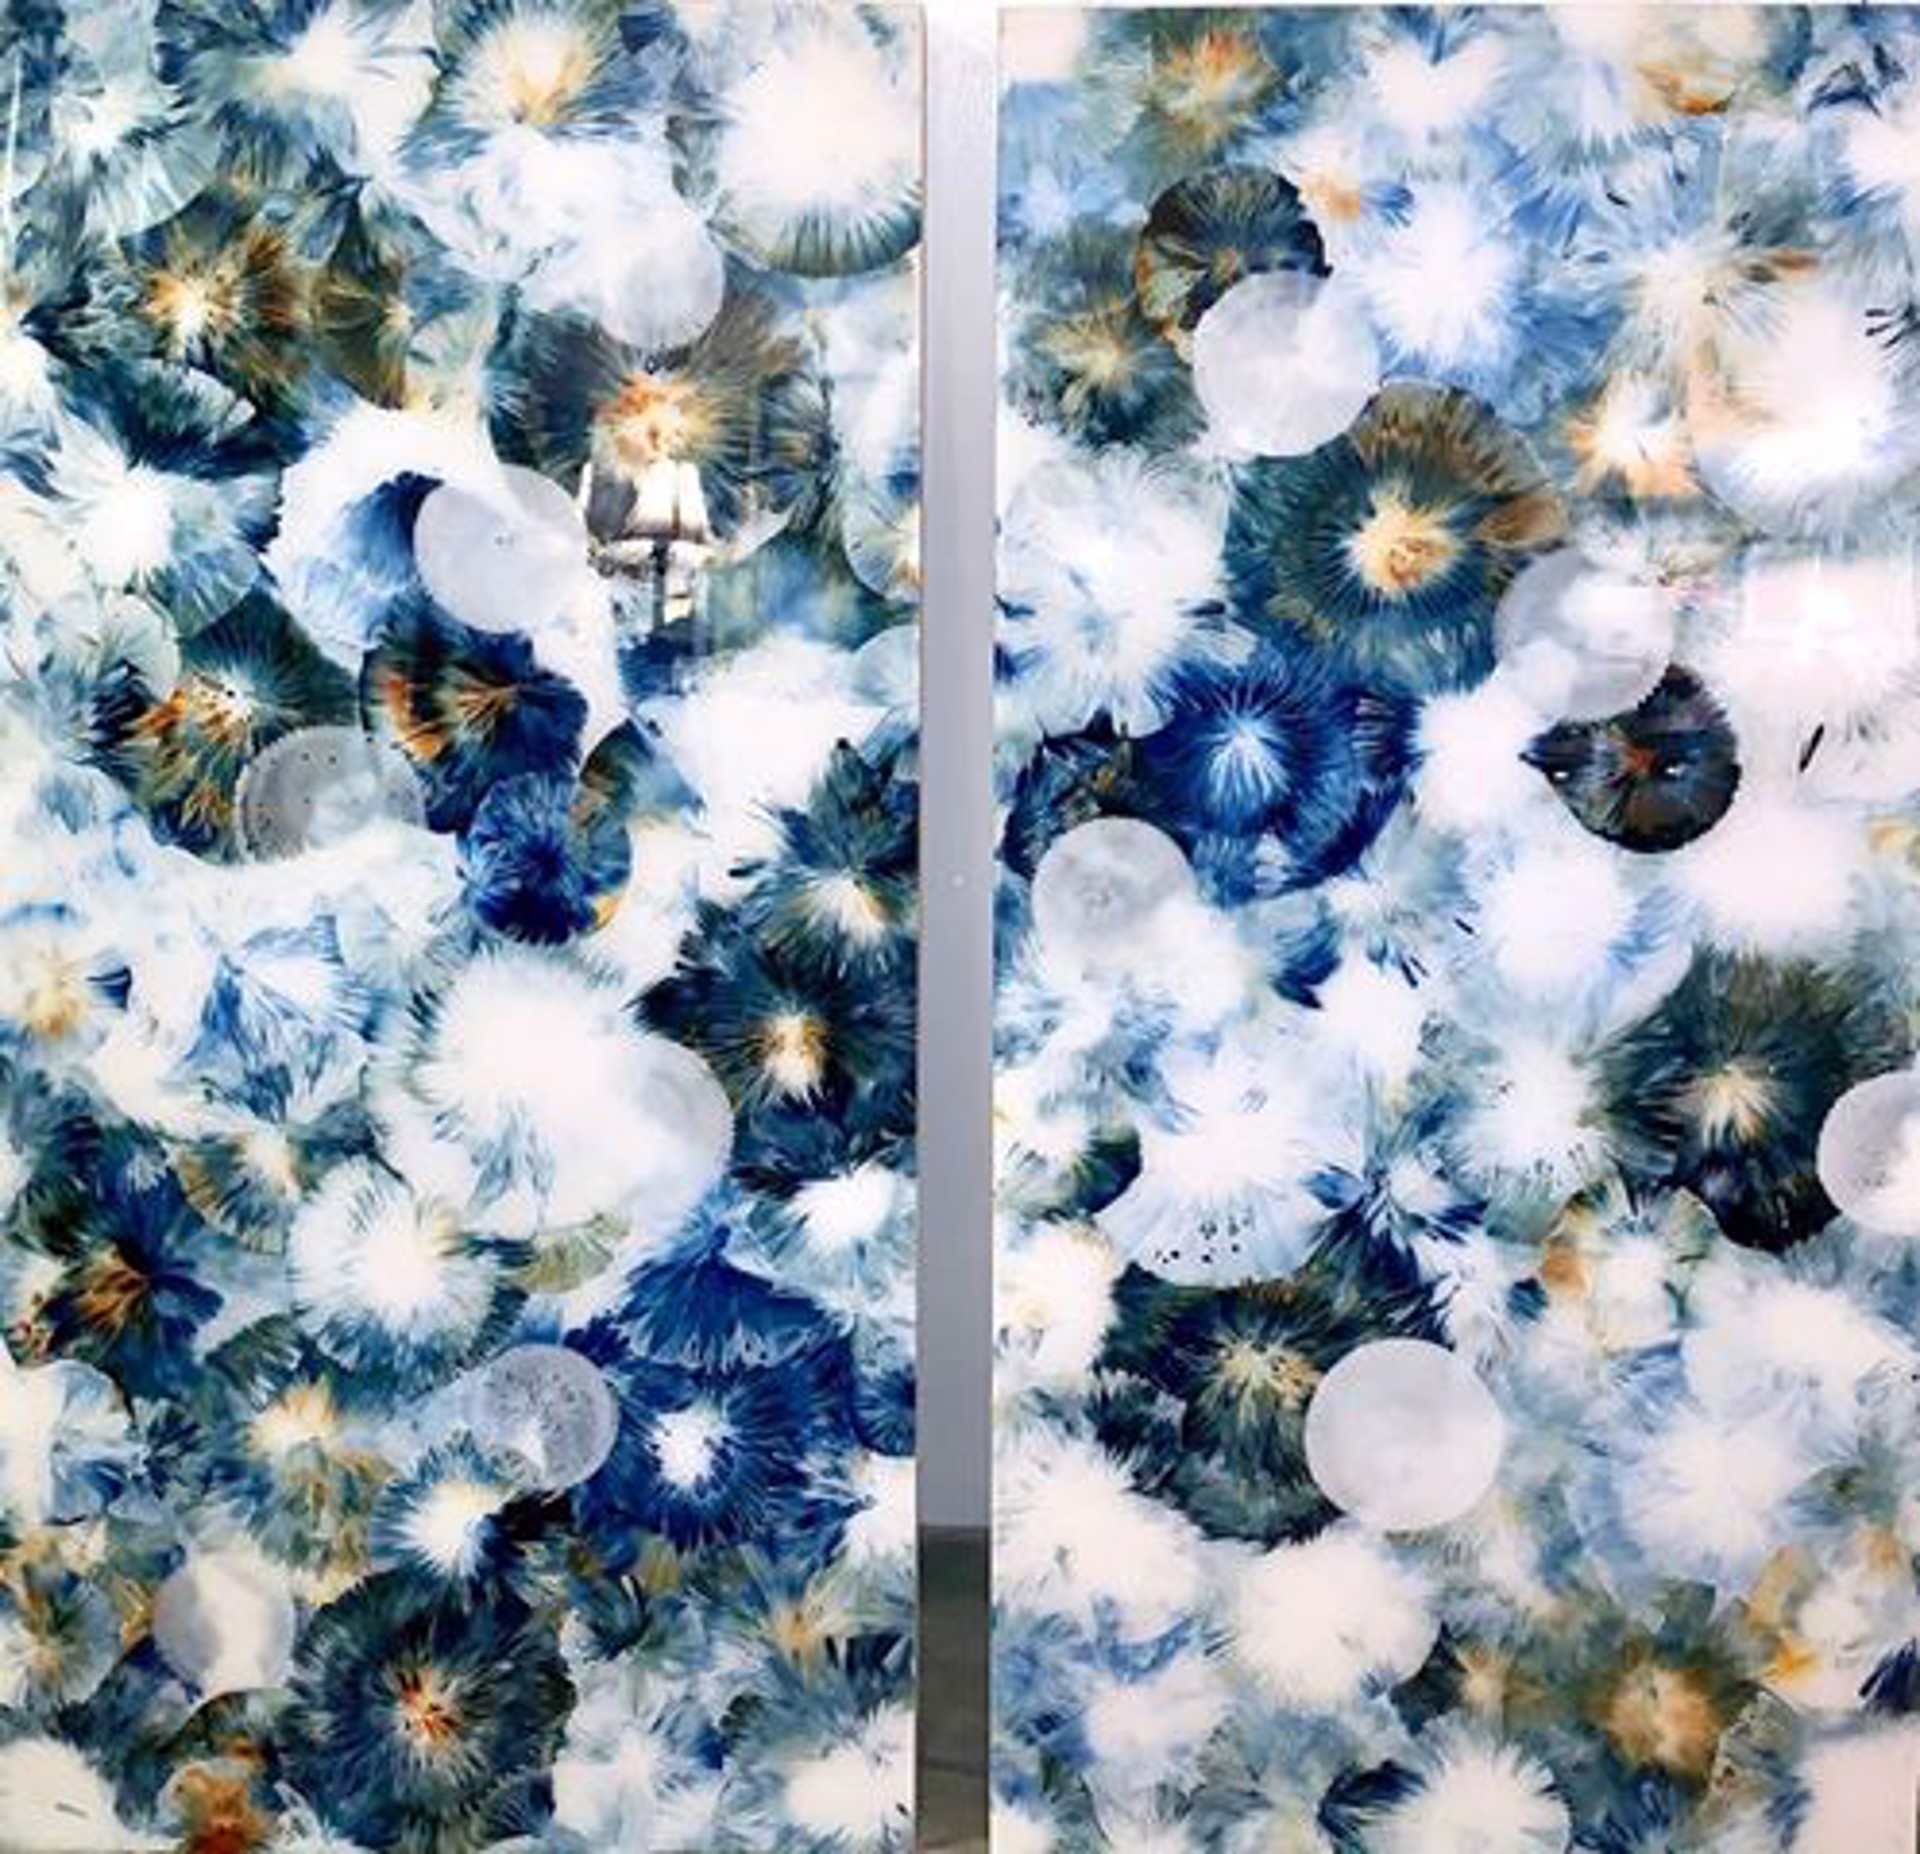 Bloom #12, Left Diptych by Jennifer Glover Riggs